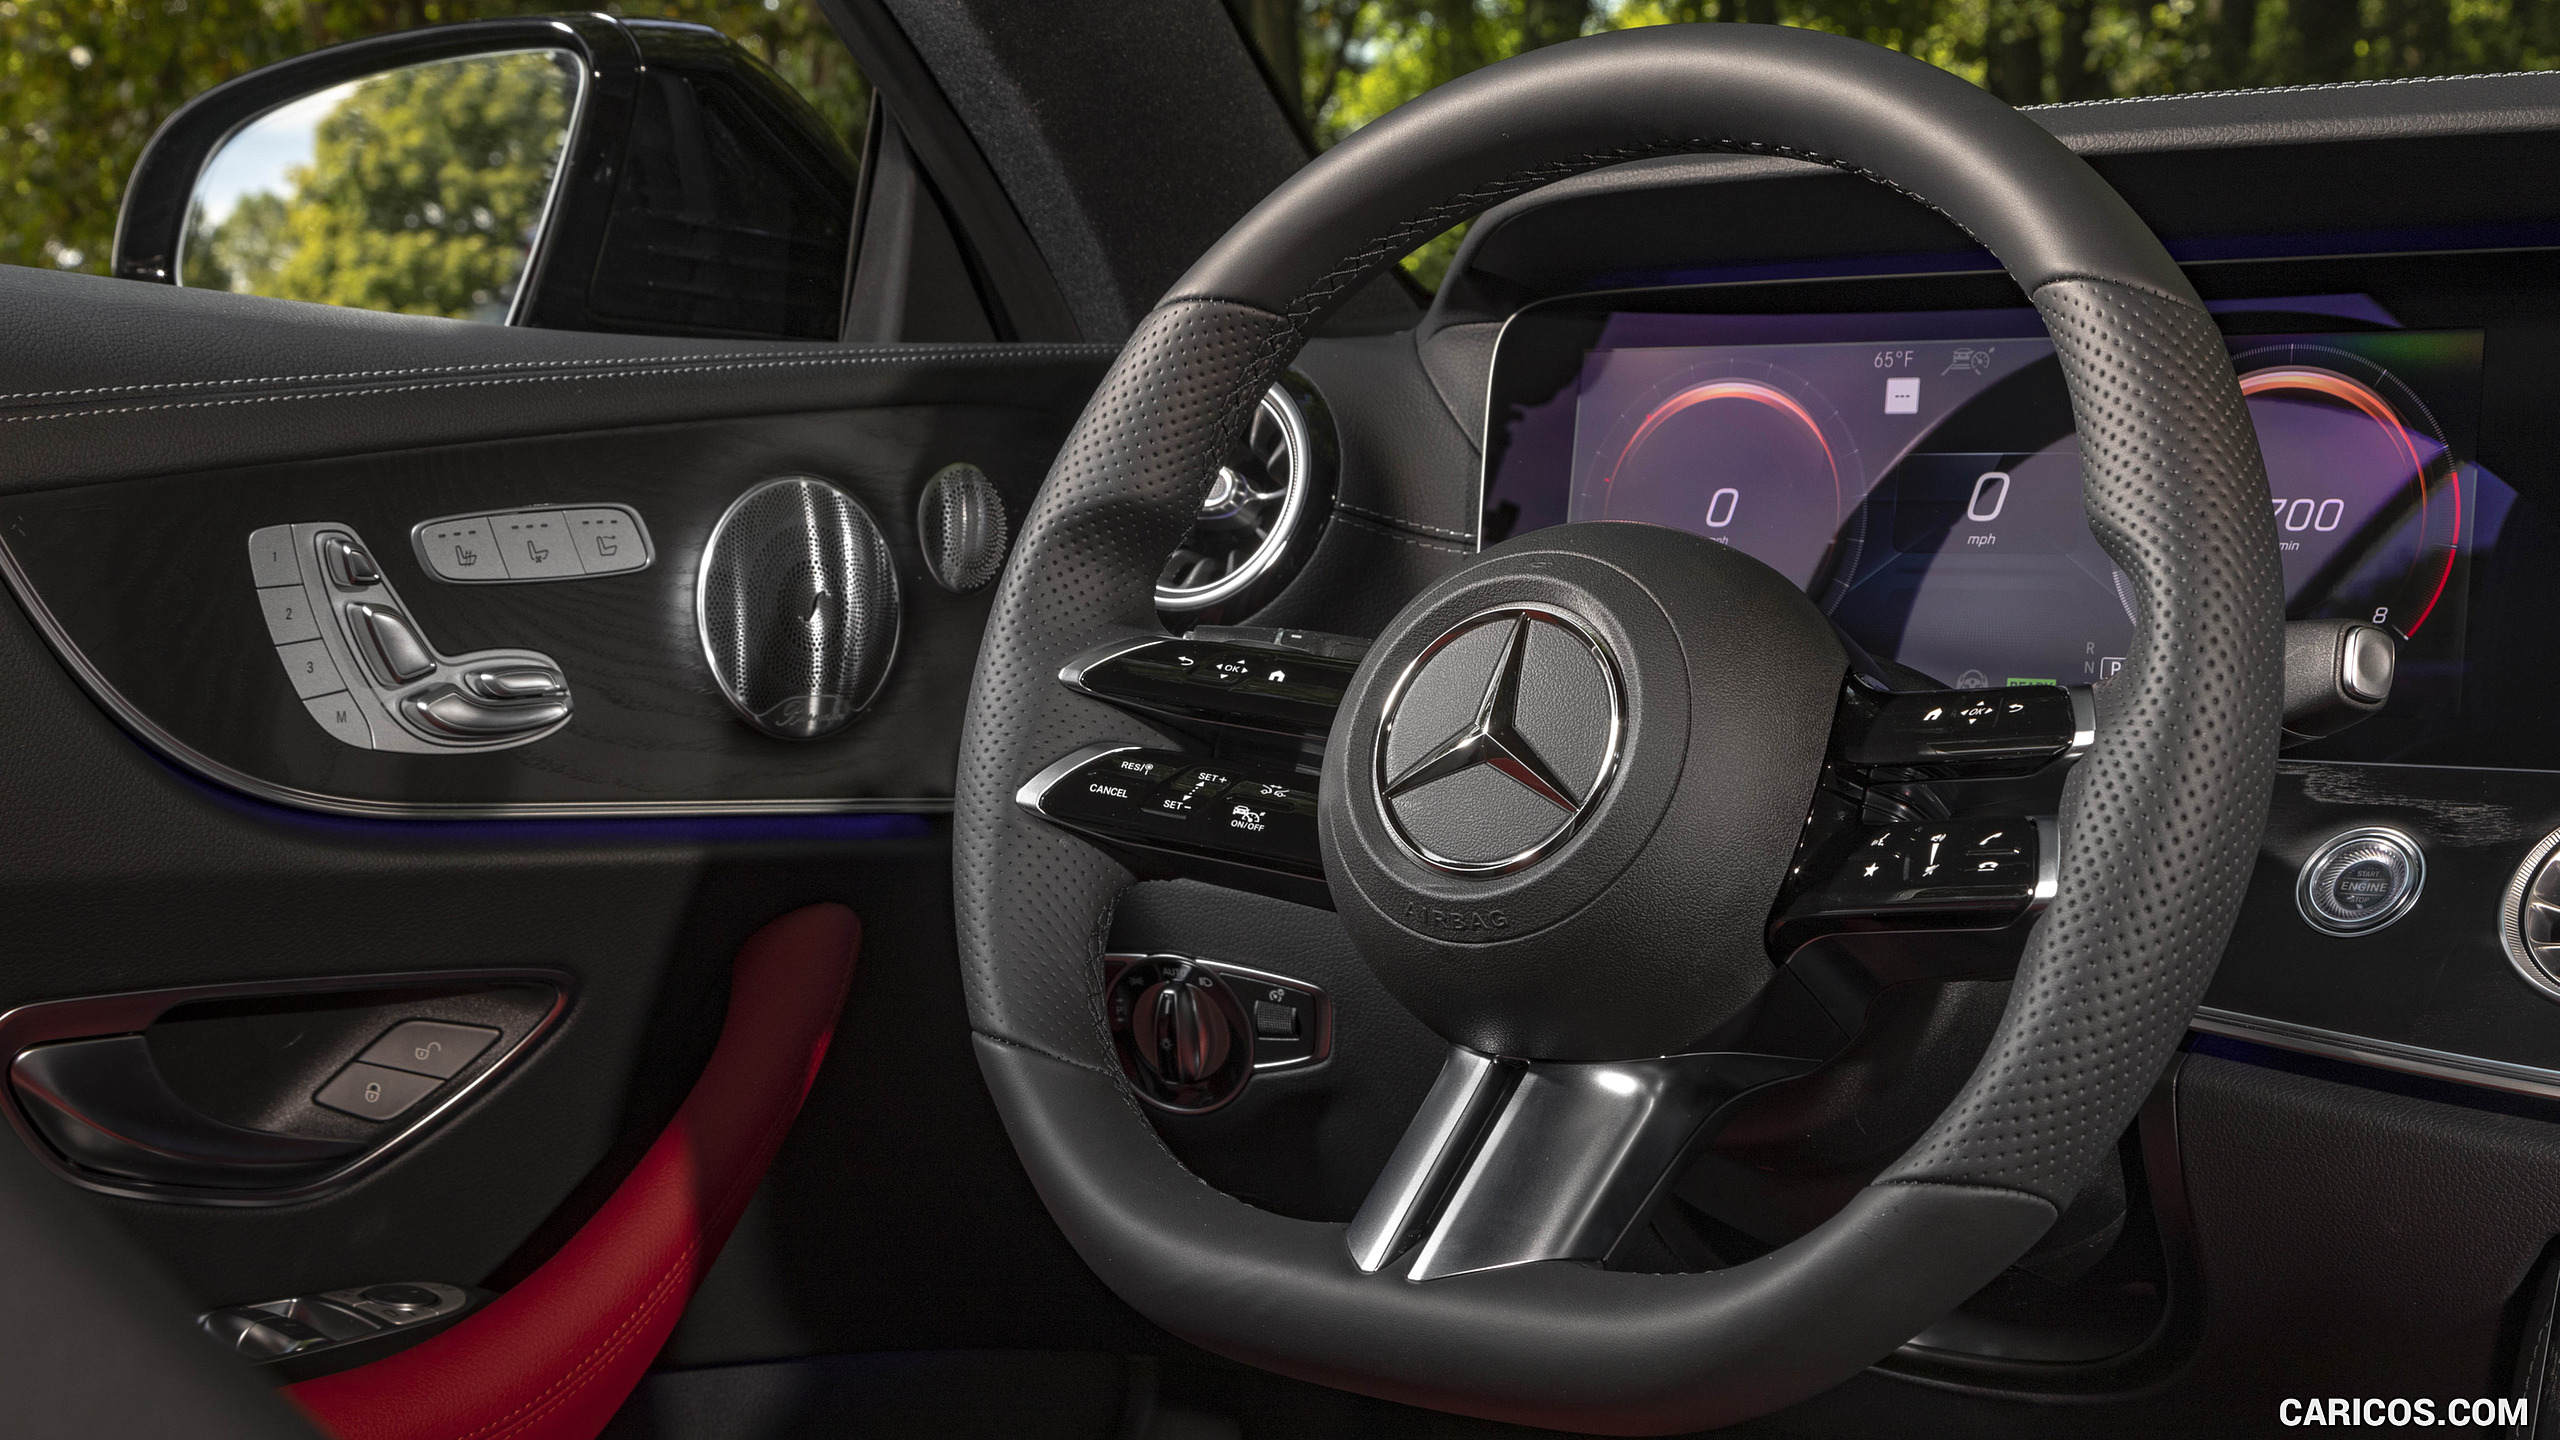 2021 Mercedes-Benz E 450 4MATIC Coupe (US-Spec) - Interior, Steering Wheel, #35 of 49